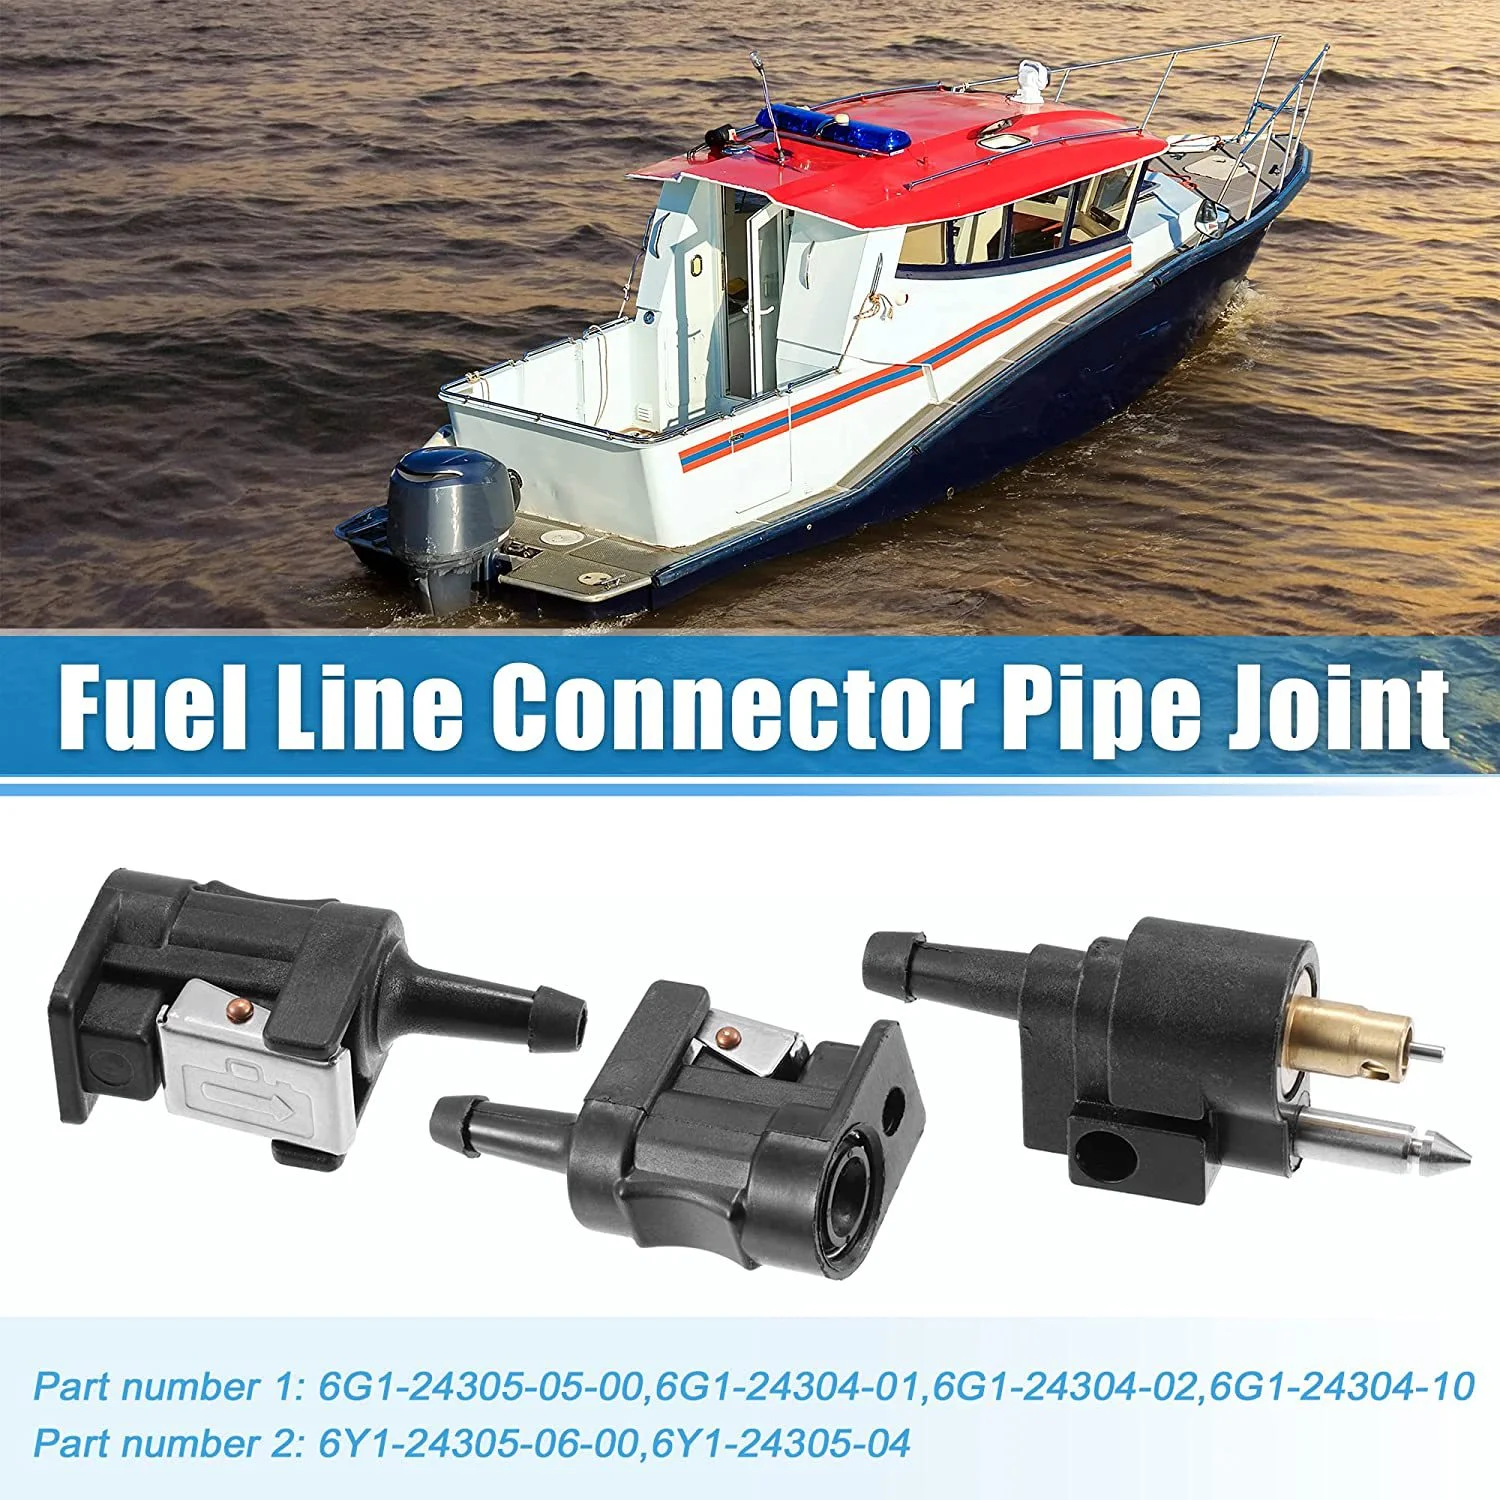 Marine Outboard Oil Tank Fuel Line Male/ Female Sockets Quick Coupling Yachts/Fishing Boats/Fast Boats/Cruise Ships Accessories hidup solid brass buckle 100% pure cowhide belt for male jeans accessories nwj1228